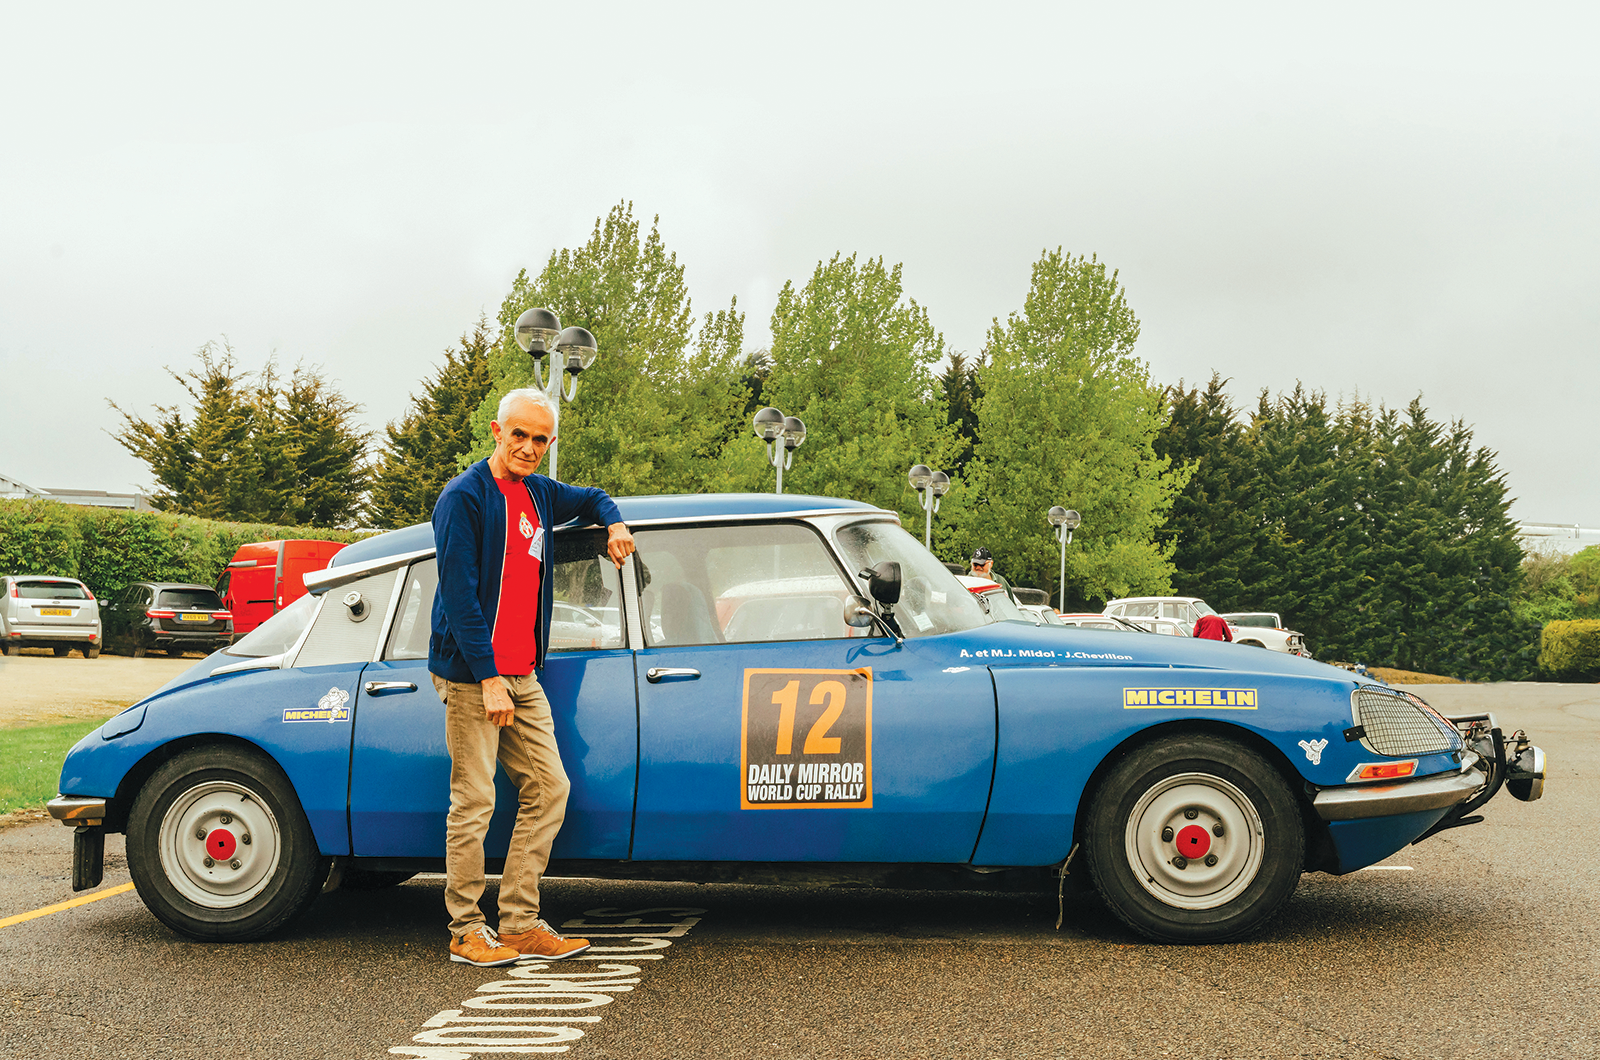 Classic & Sports Car – They’re coming home: World Cup Rally’s 50th anniversary